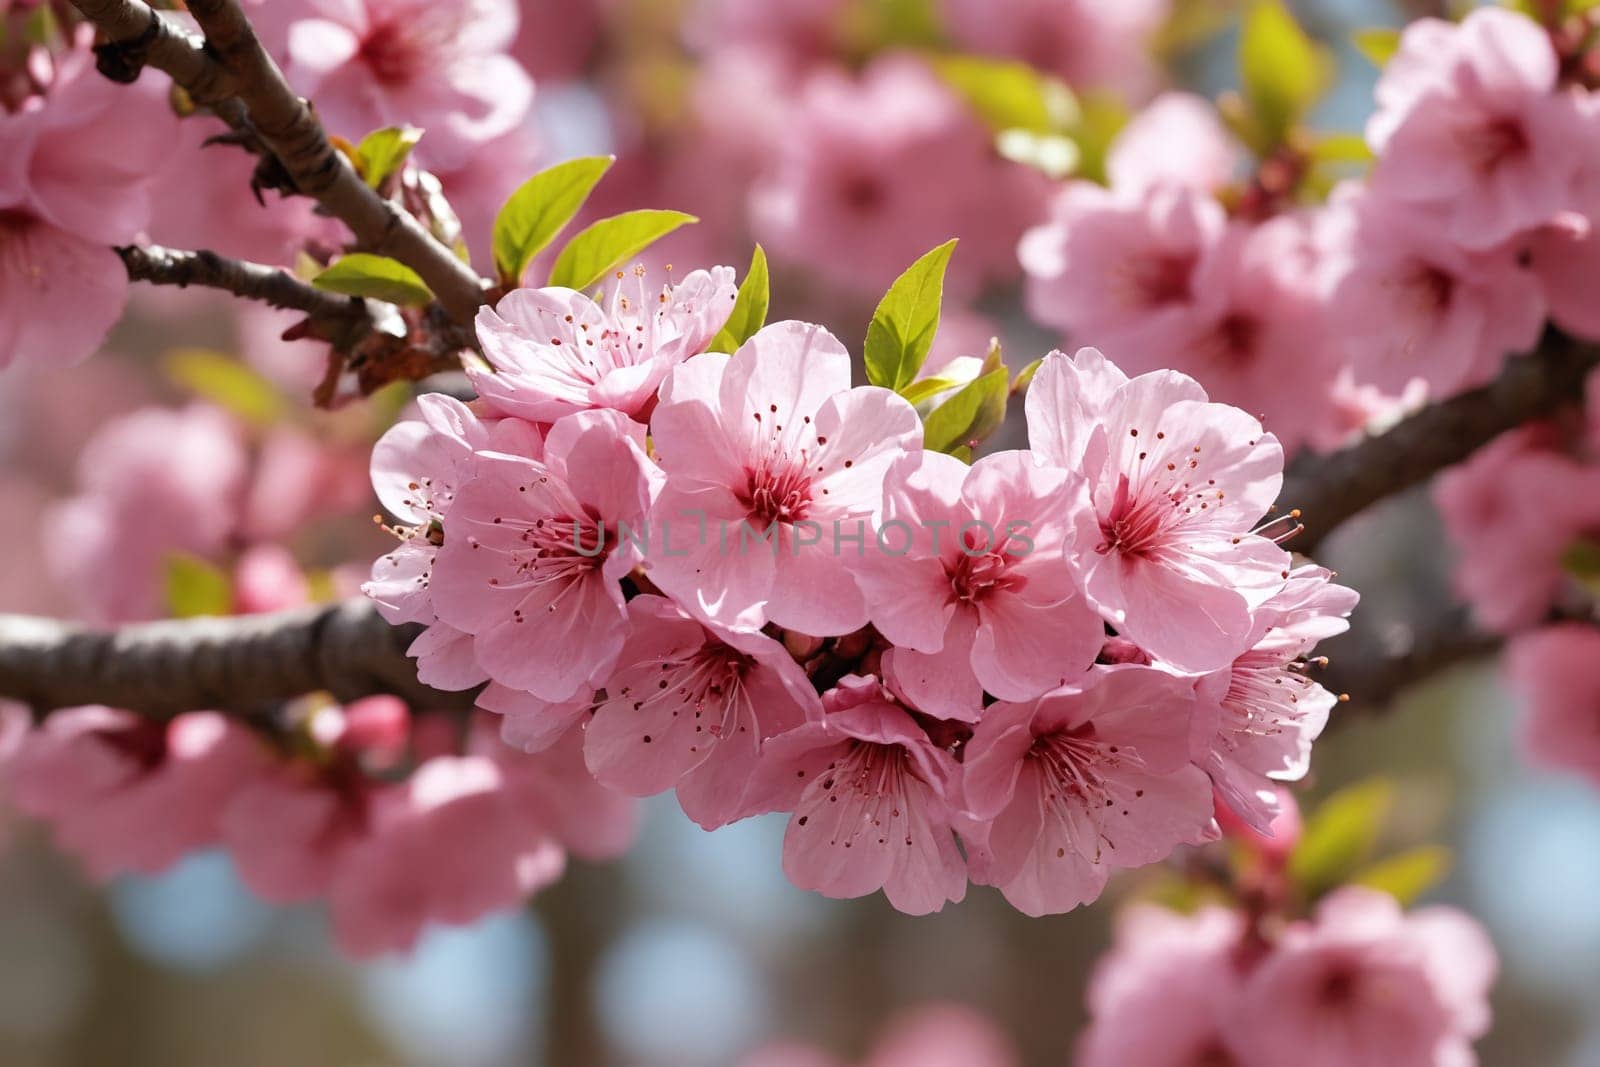 A celebration of transience and beauty, these cherry blossoms exude vibrant color under the clear blue sky.